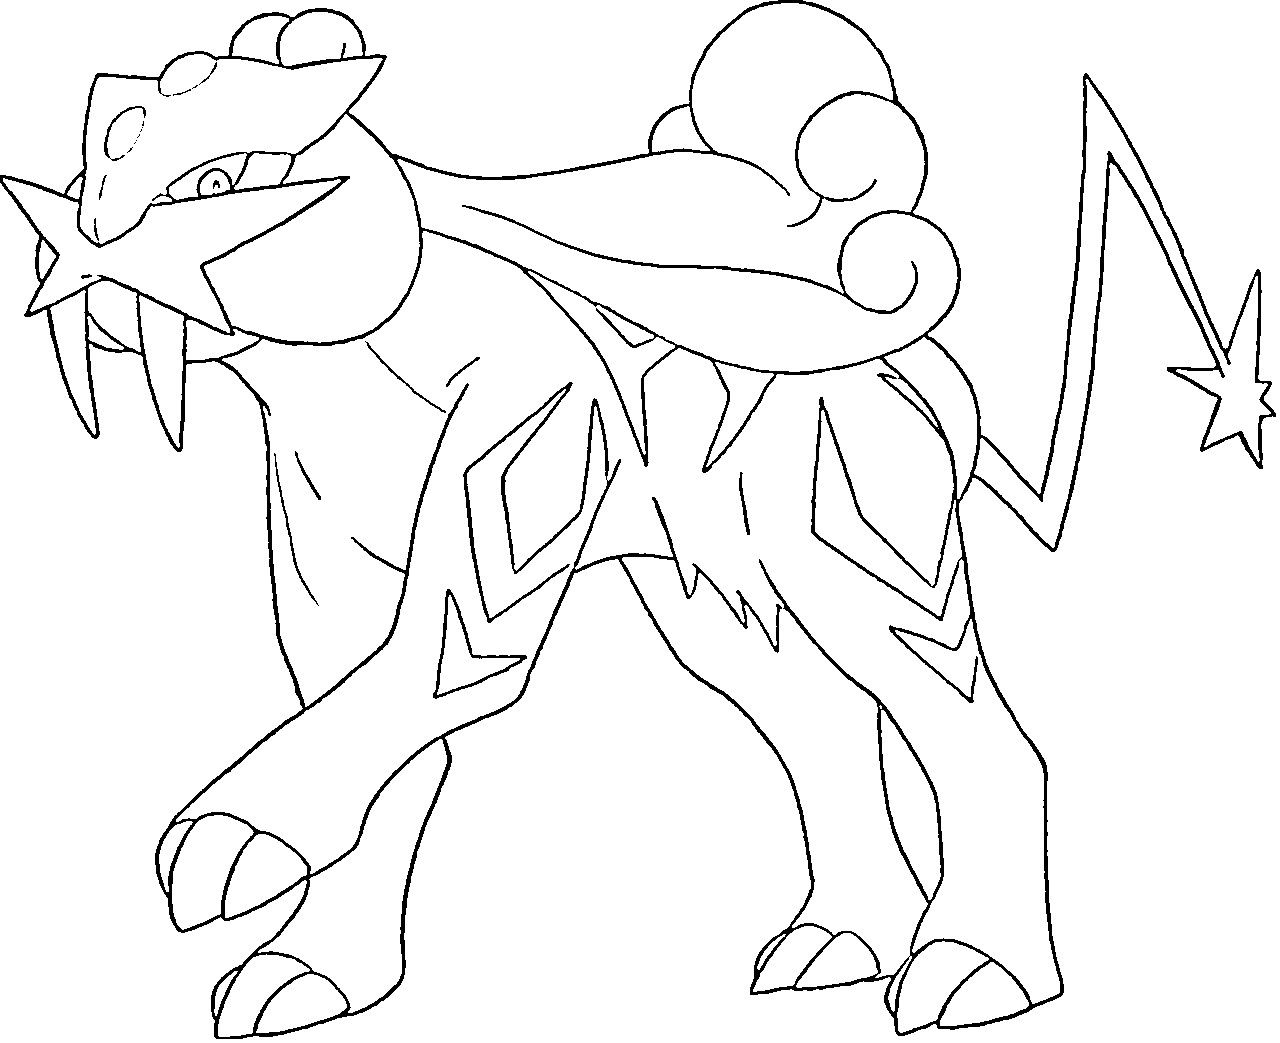 Raikou Generation 2 Coloring Pages - Coloring Cool